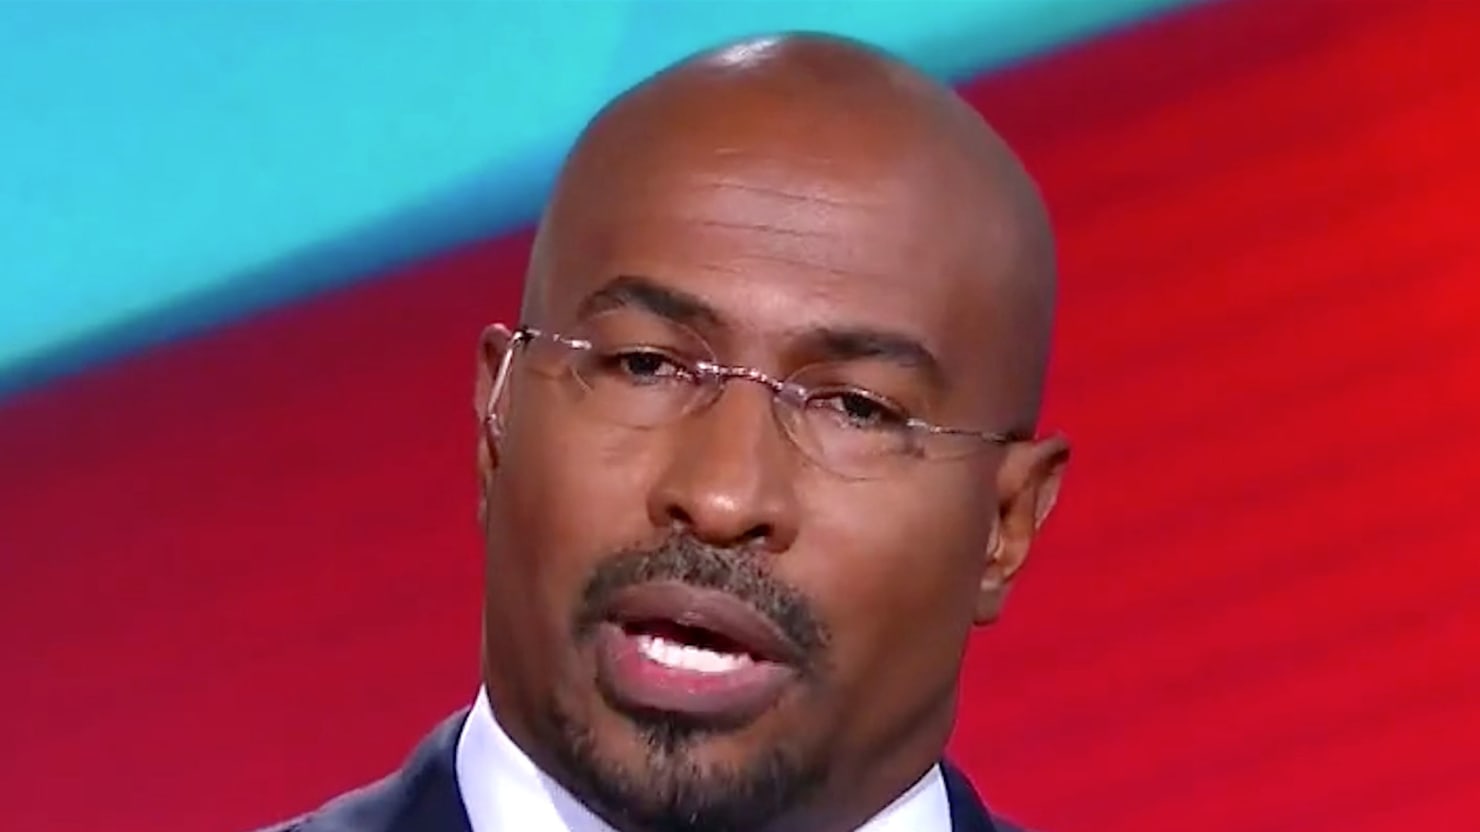 Van Jones Near Tears on CNN: This Is a Deeply Painful Moment in America